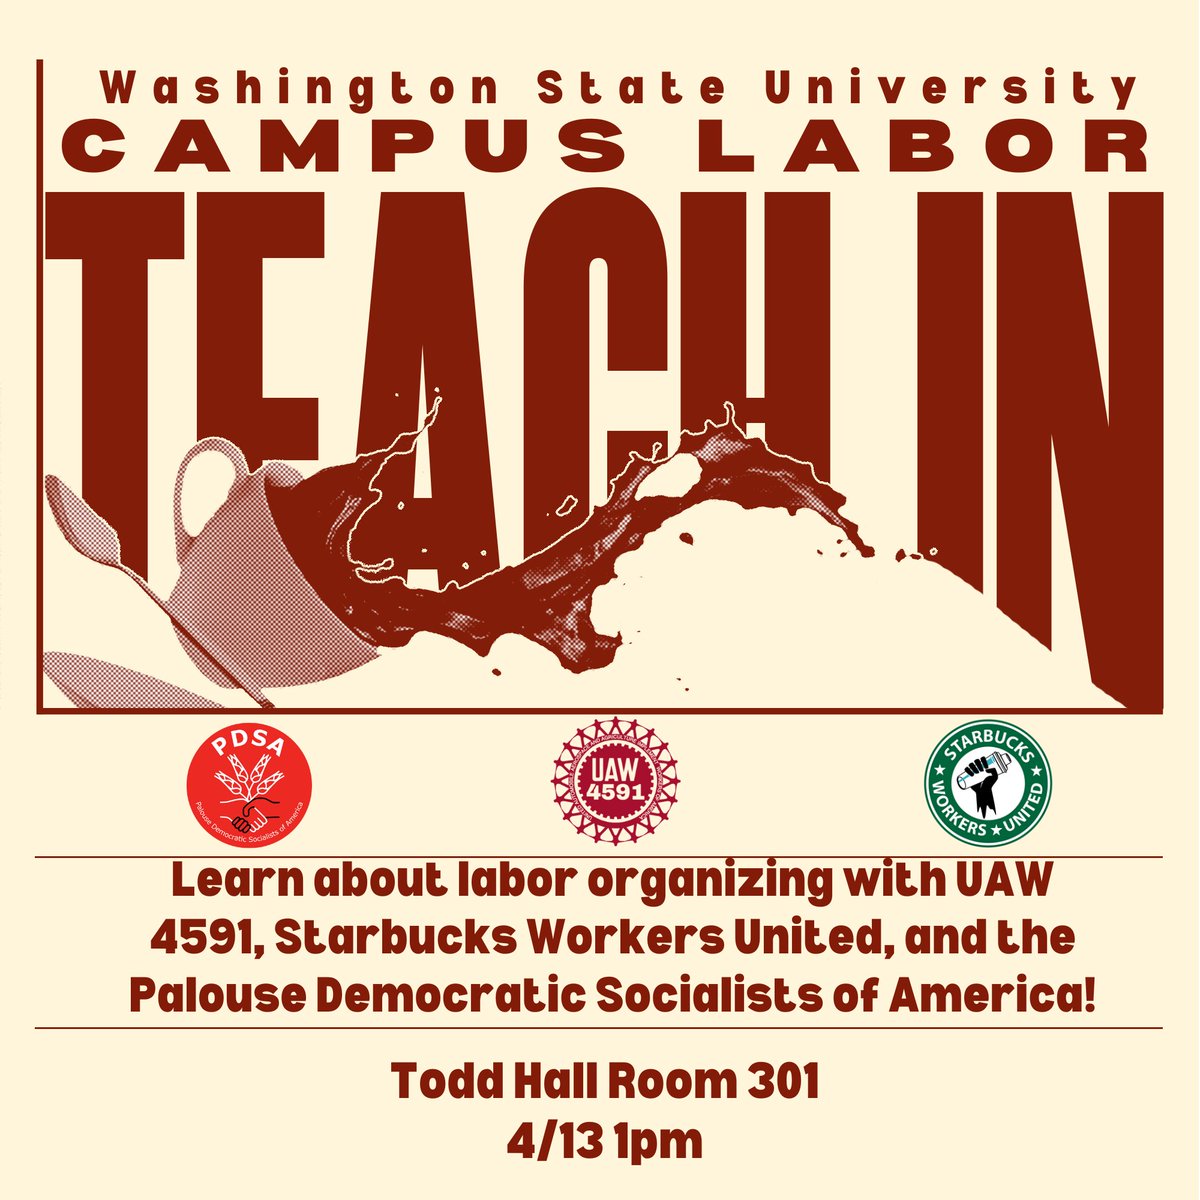 At 1 pm on April 13 in Todd Hall Room 301 at WSU, we'll be holding a campus labor teach-in with UAW 4591 and SBWU! Come by to learn about the organizing campaigns of WSU graduate student workers and Starbucks workers and how we can solidify support for organized labor on campus!